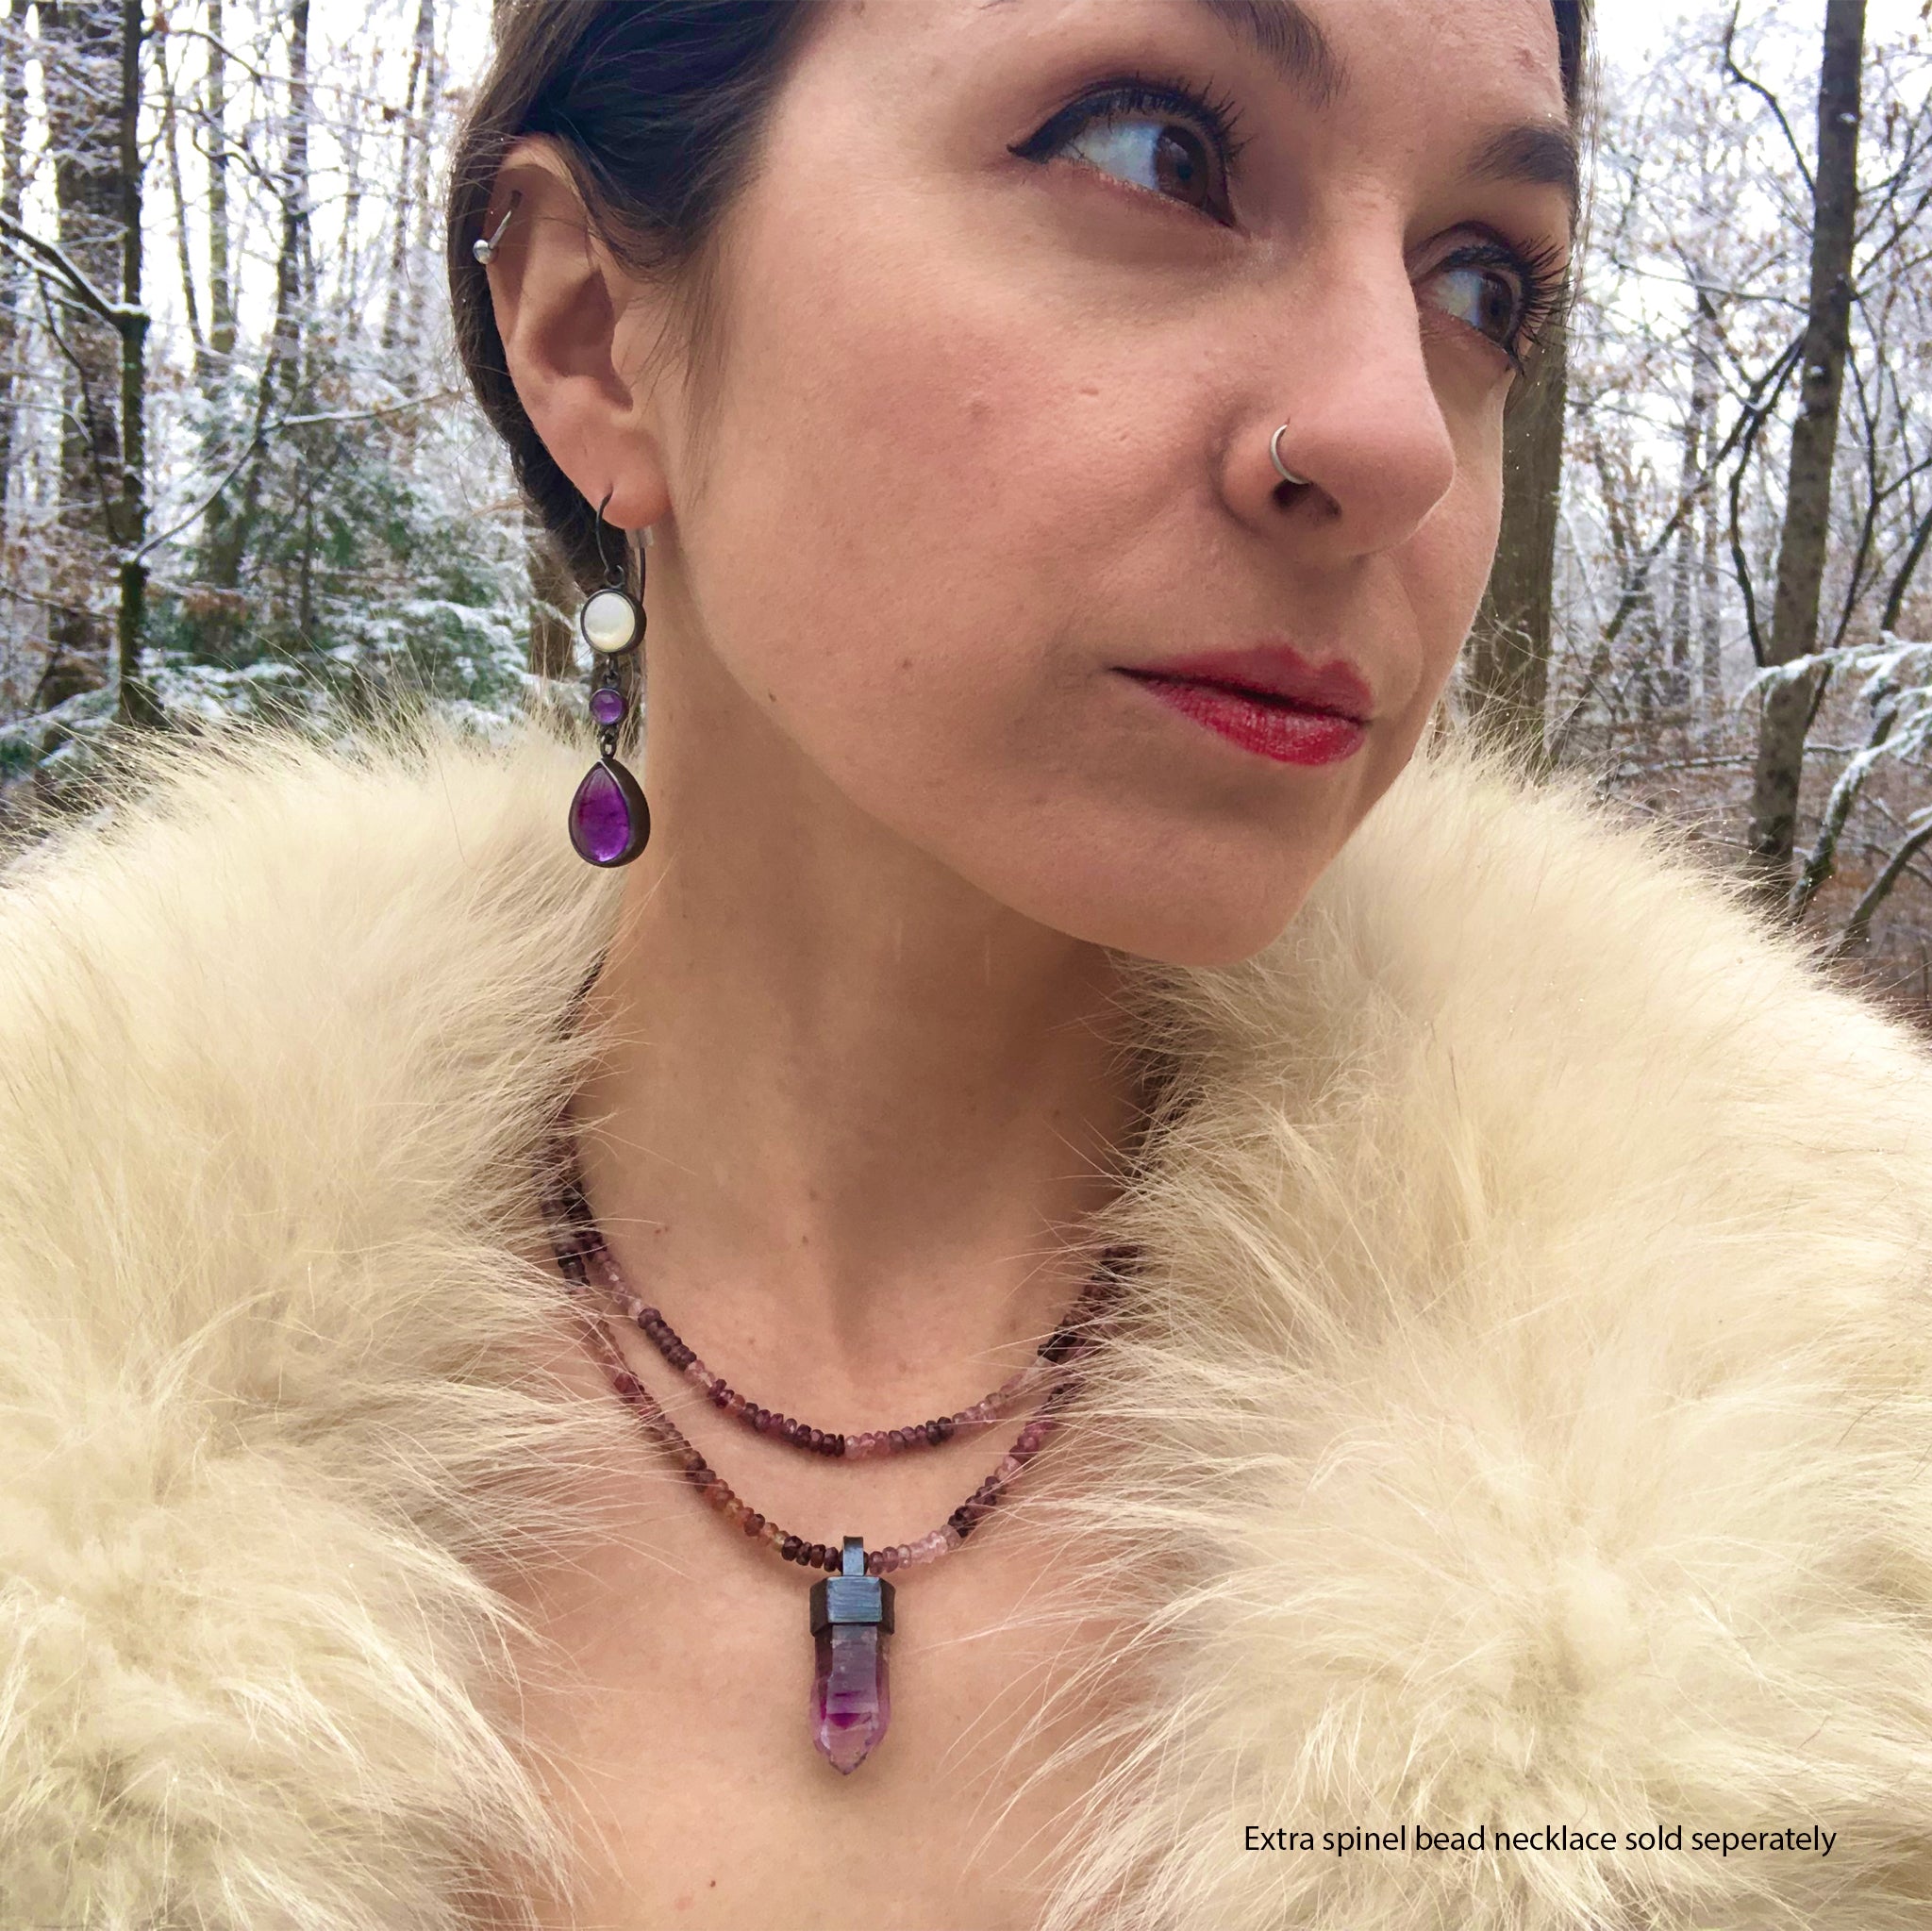 Amethyst Crystal Pendant with Spinel Beads. "Enamored Adornments" Collection by Alex Lozier Jewelry.